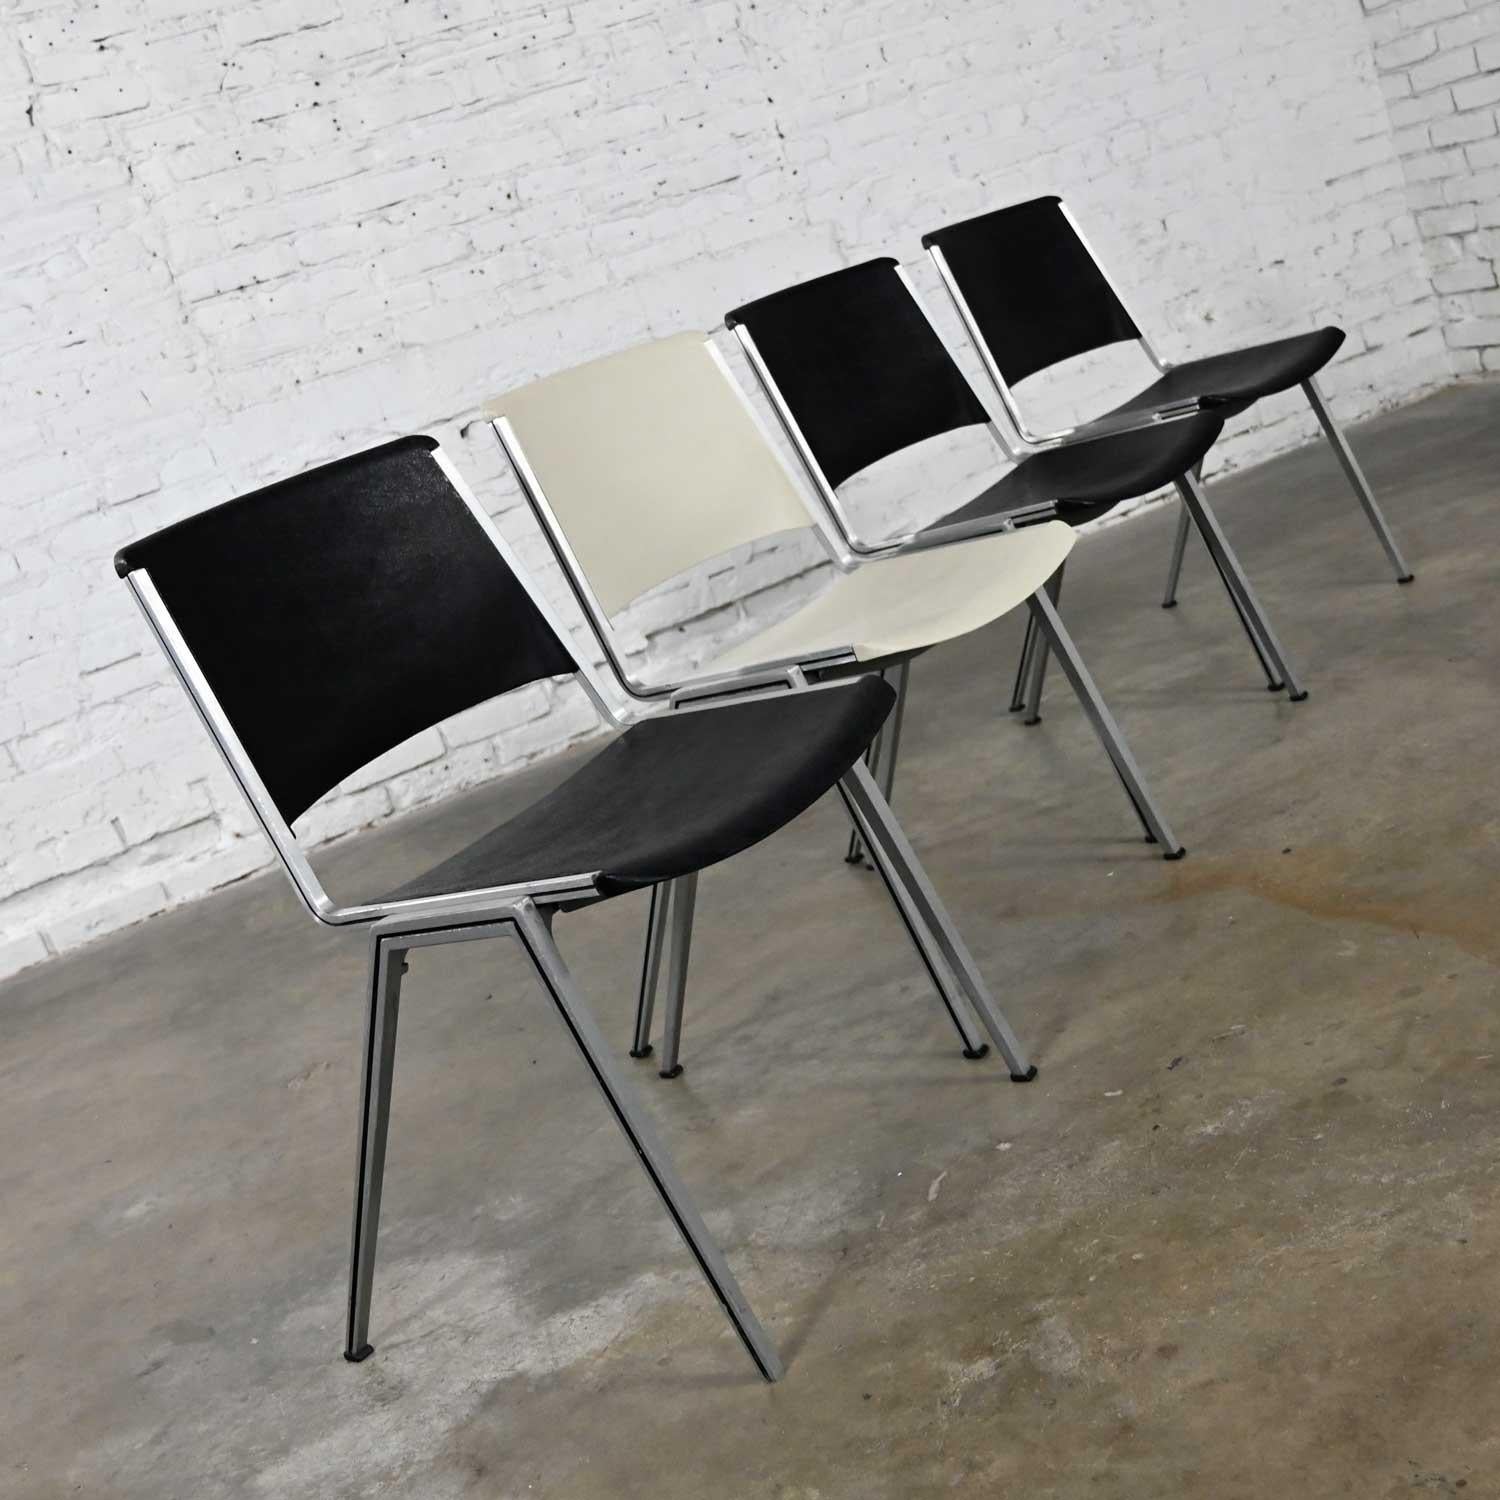 American Vintage Aluminum Steelcase Stacking Chairs Model #1278 1 White 3 Black Set of 4 For Sale